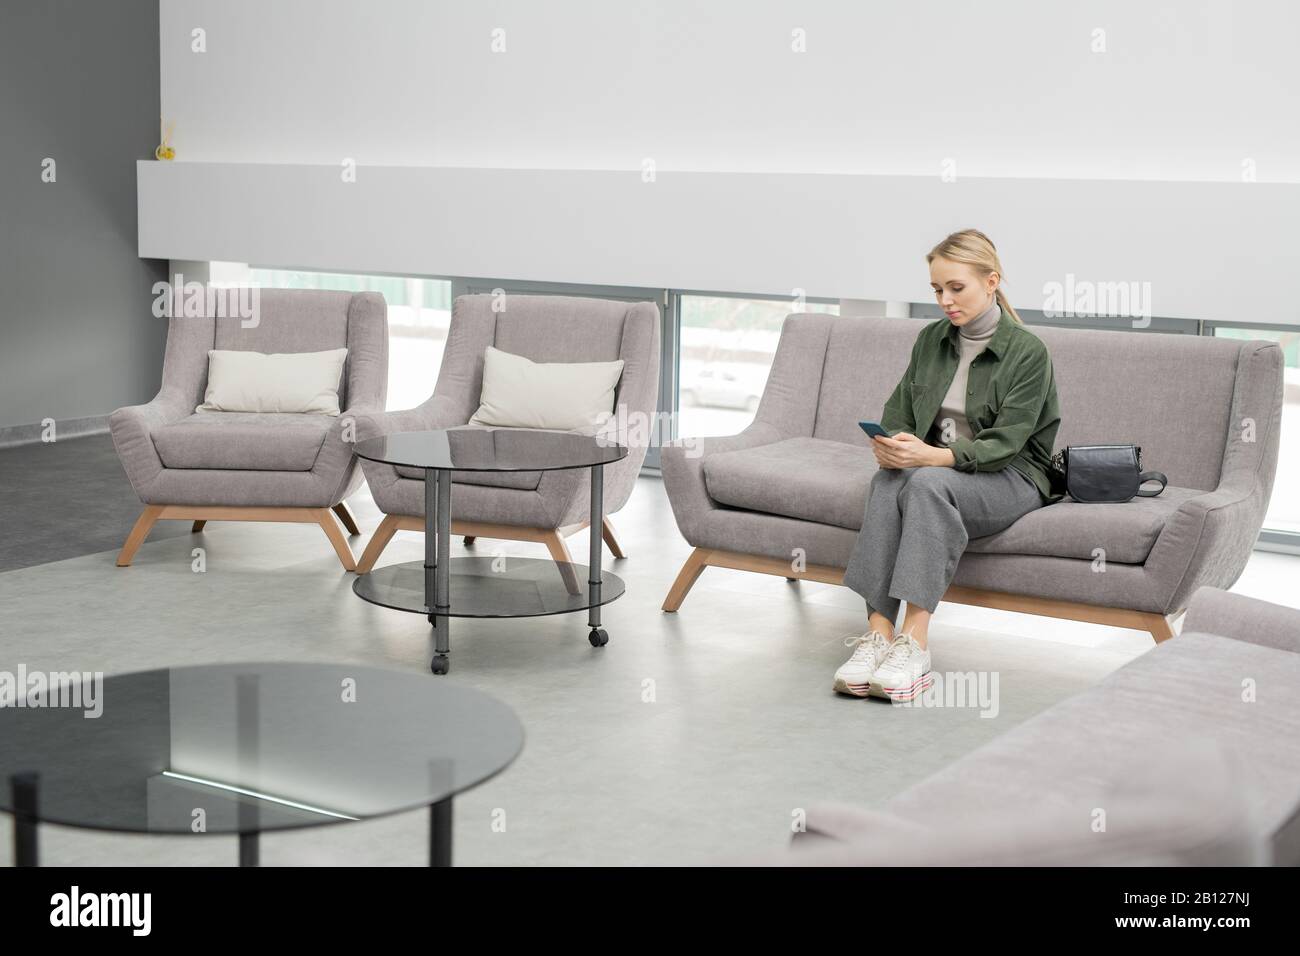 Young blond female in casualwear sitting on couch inside medical center Stock Photo